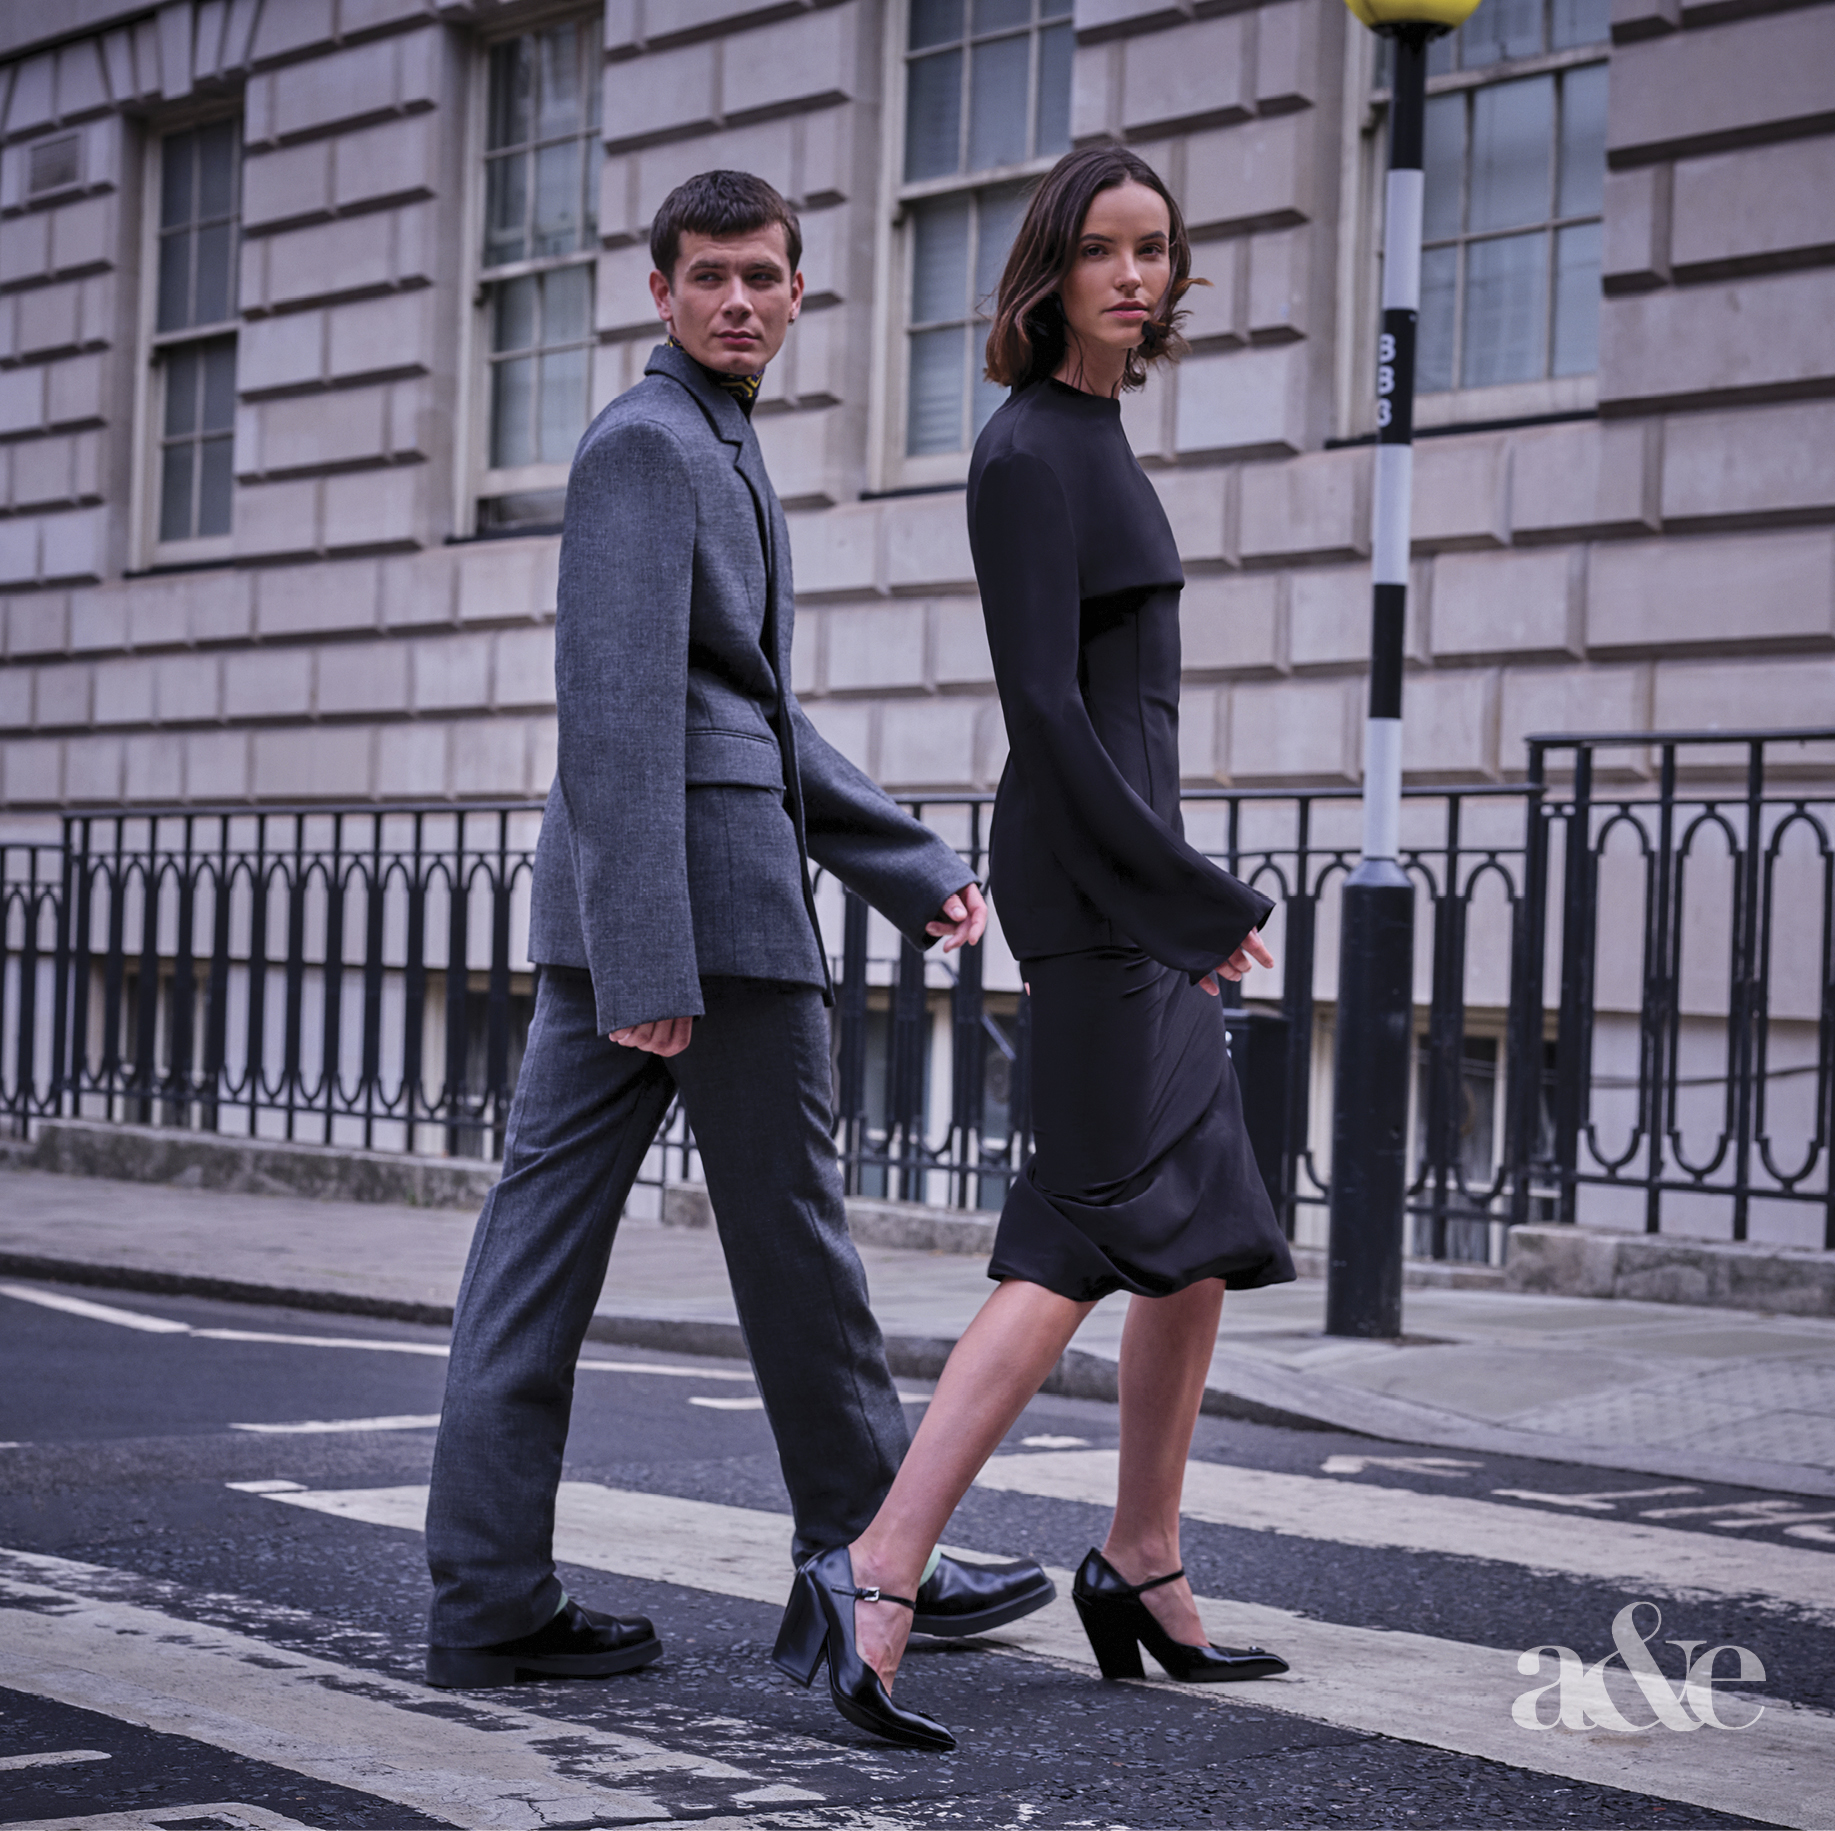 STREET LIFE: See Prada's Latest Collections For Men and Women - A&E Magazine